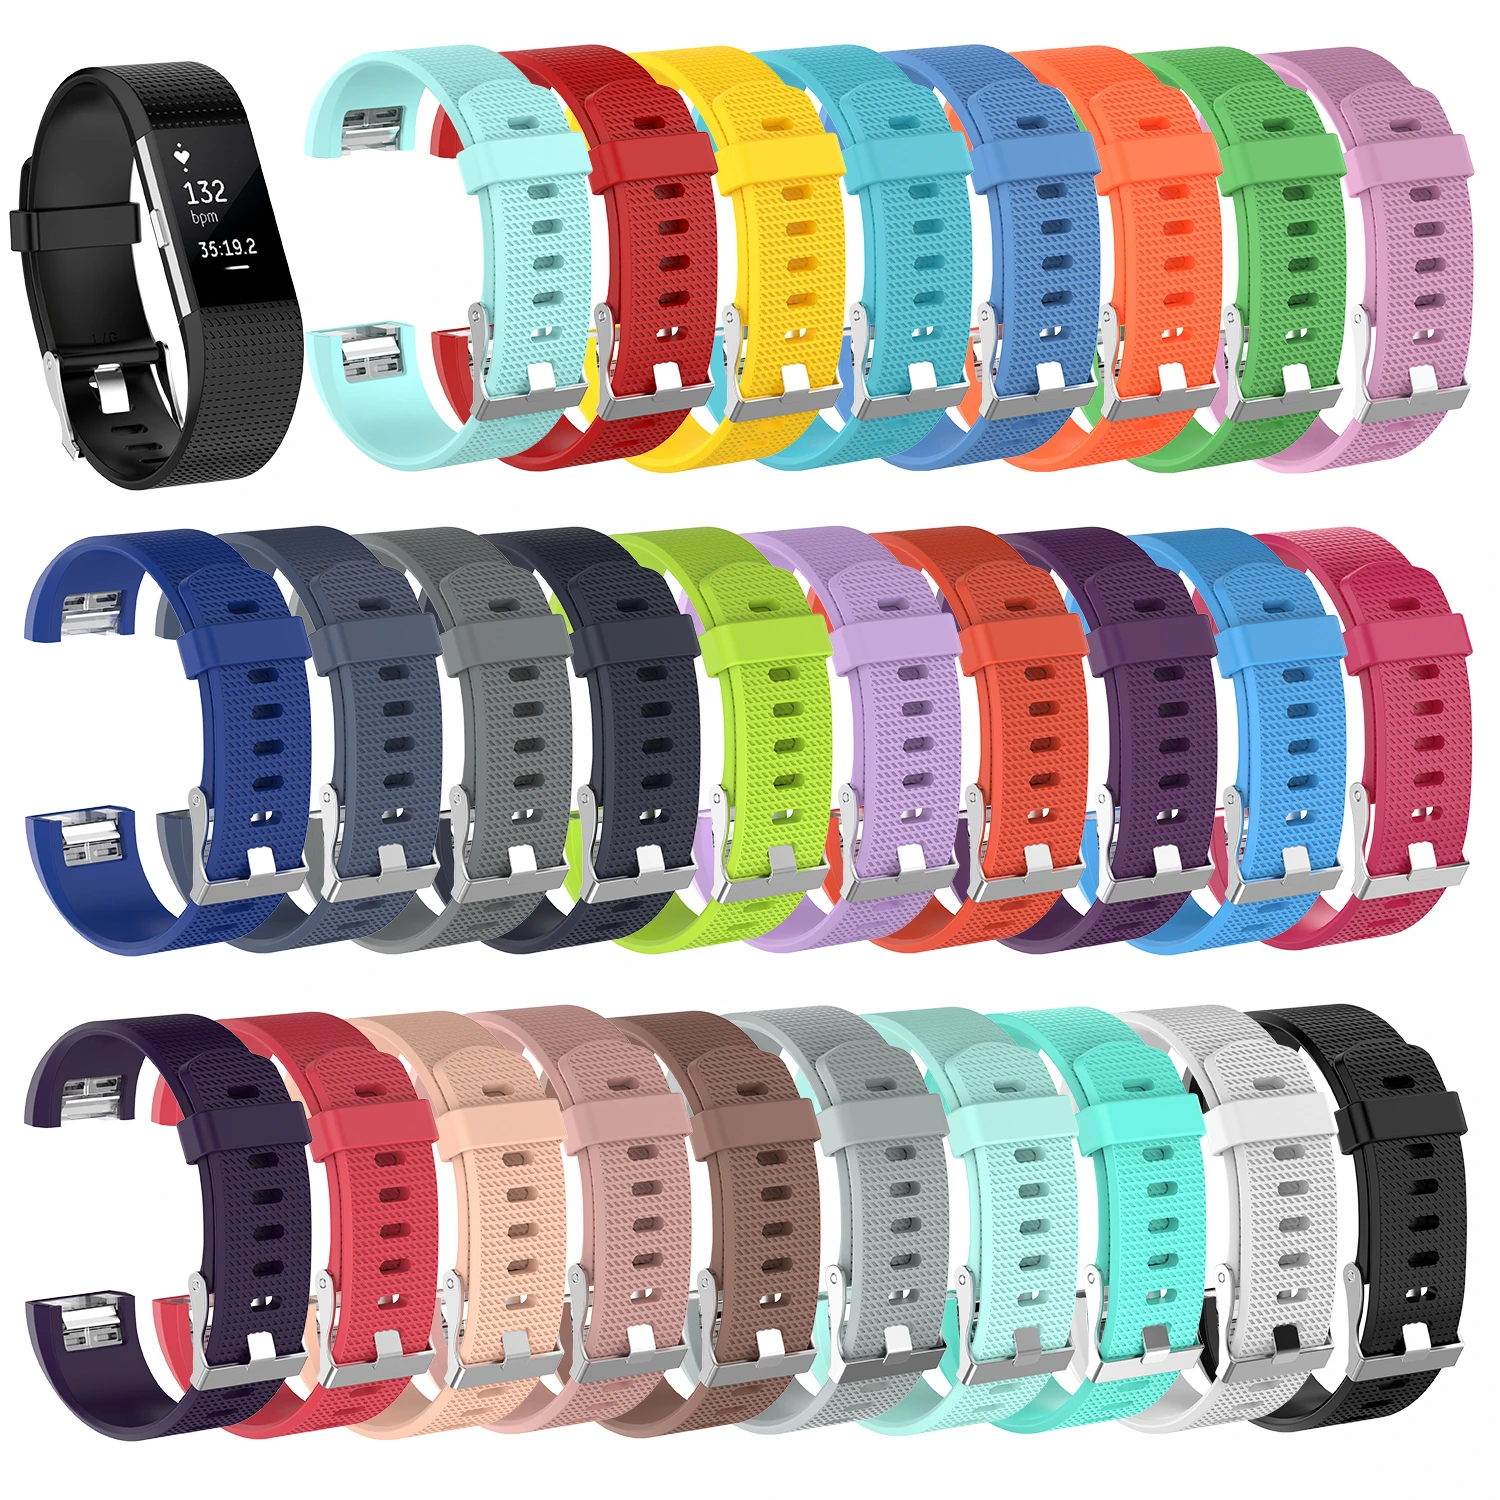 3 X Replacement Wristband Band For Fitbit Charge 2 Silicone Fitness Small/Large 